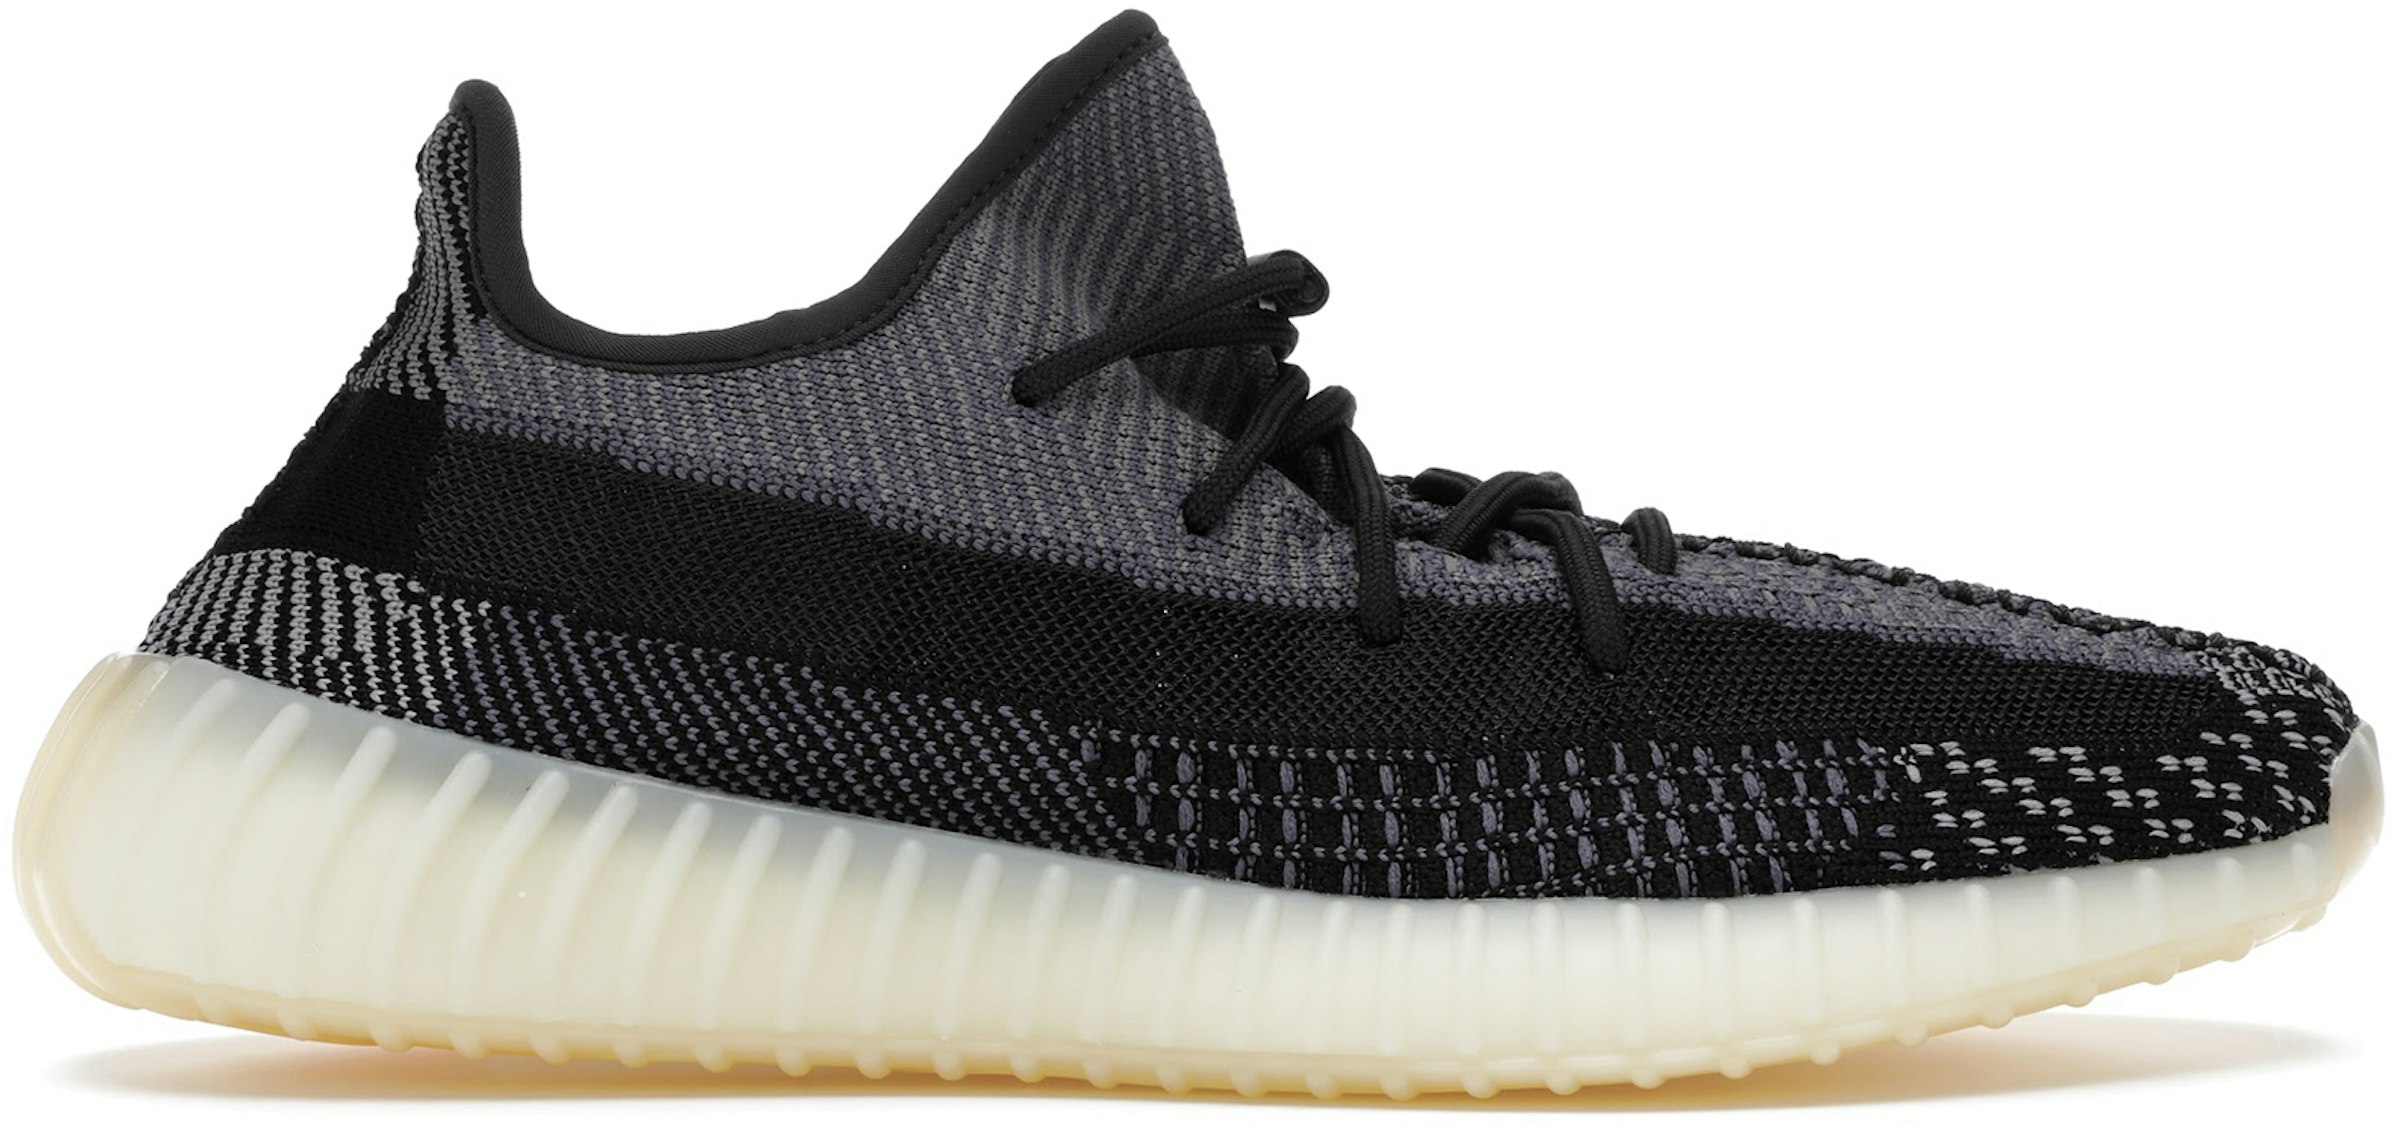 adidas Yeezy Boost 350 V2 Hombre -